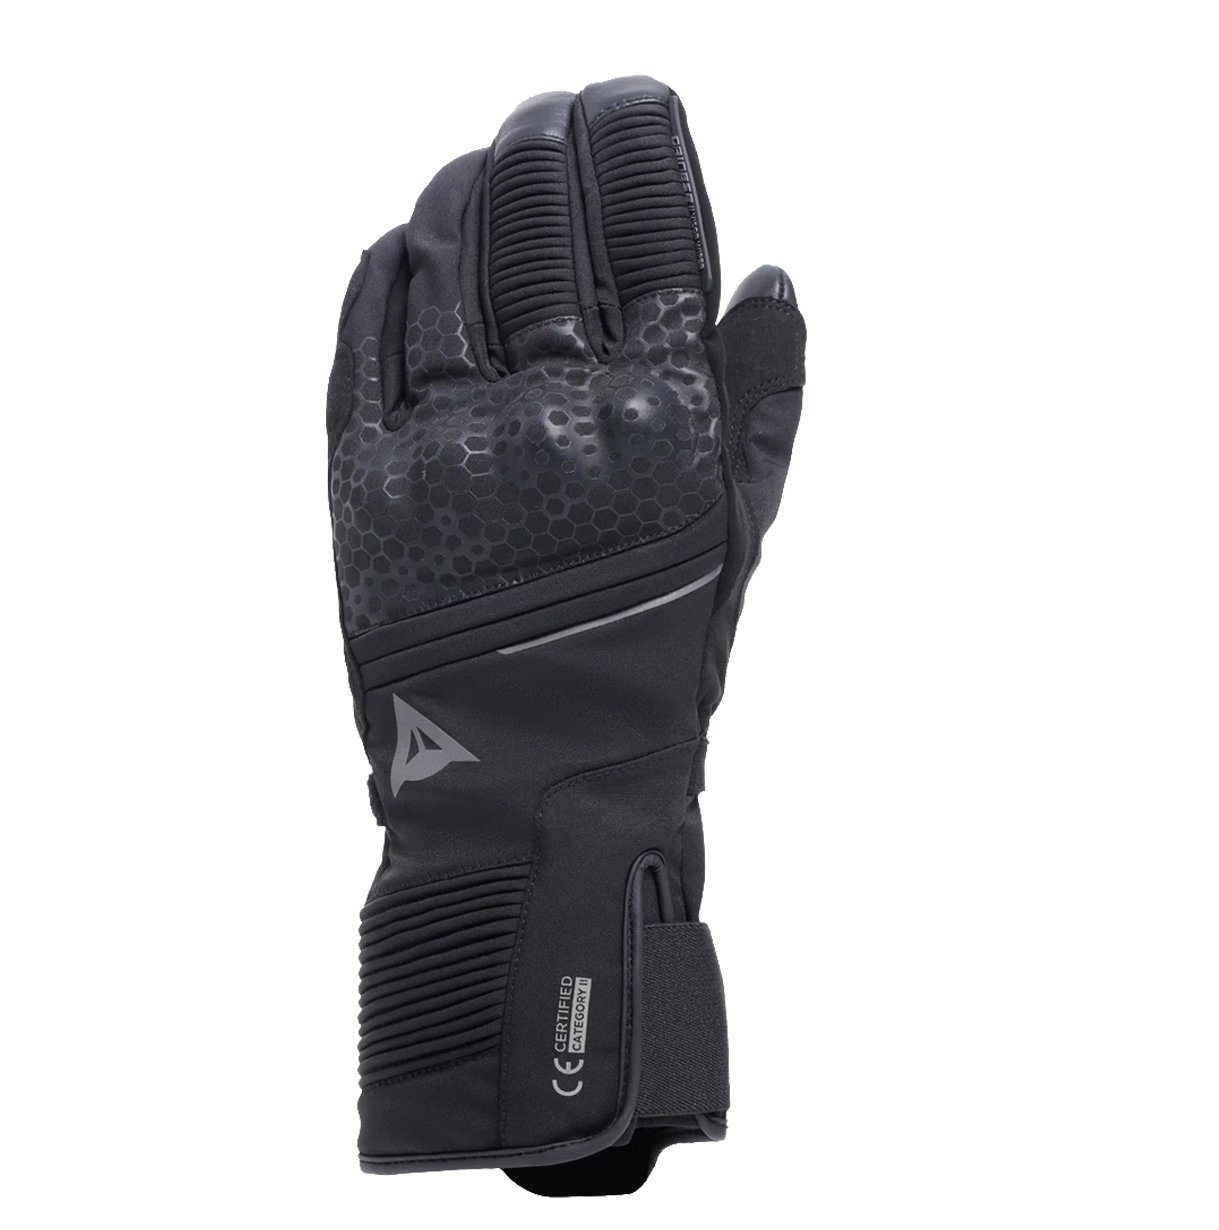 Image of Dainese Tempest 2 D-Dry Long Thermal Gloves Black Size 2XL ID 8051019679659